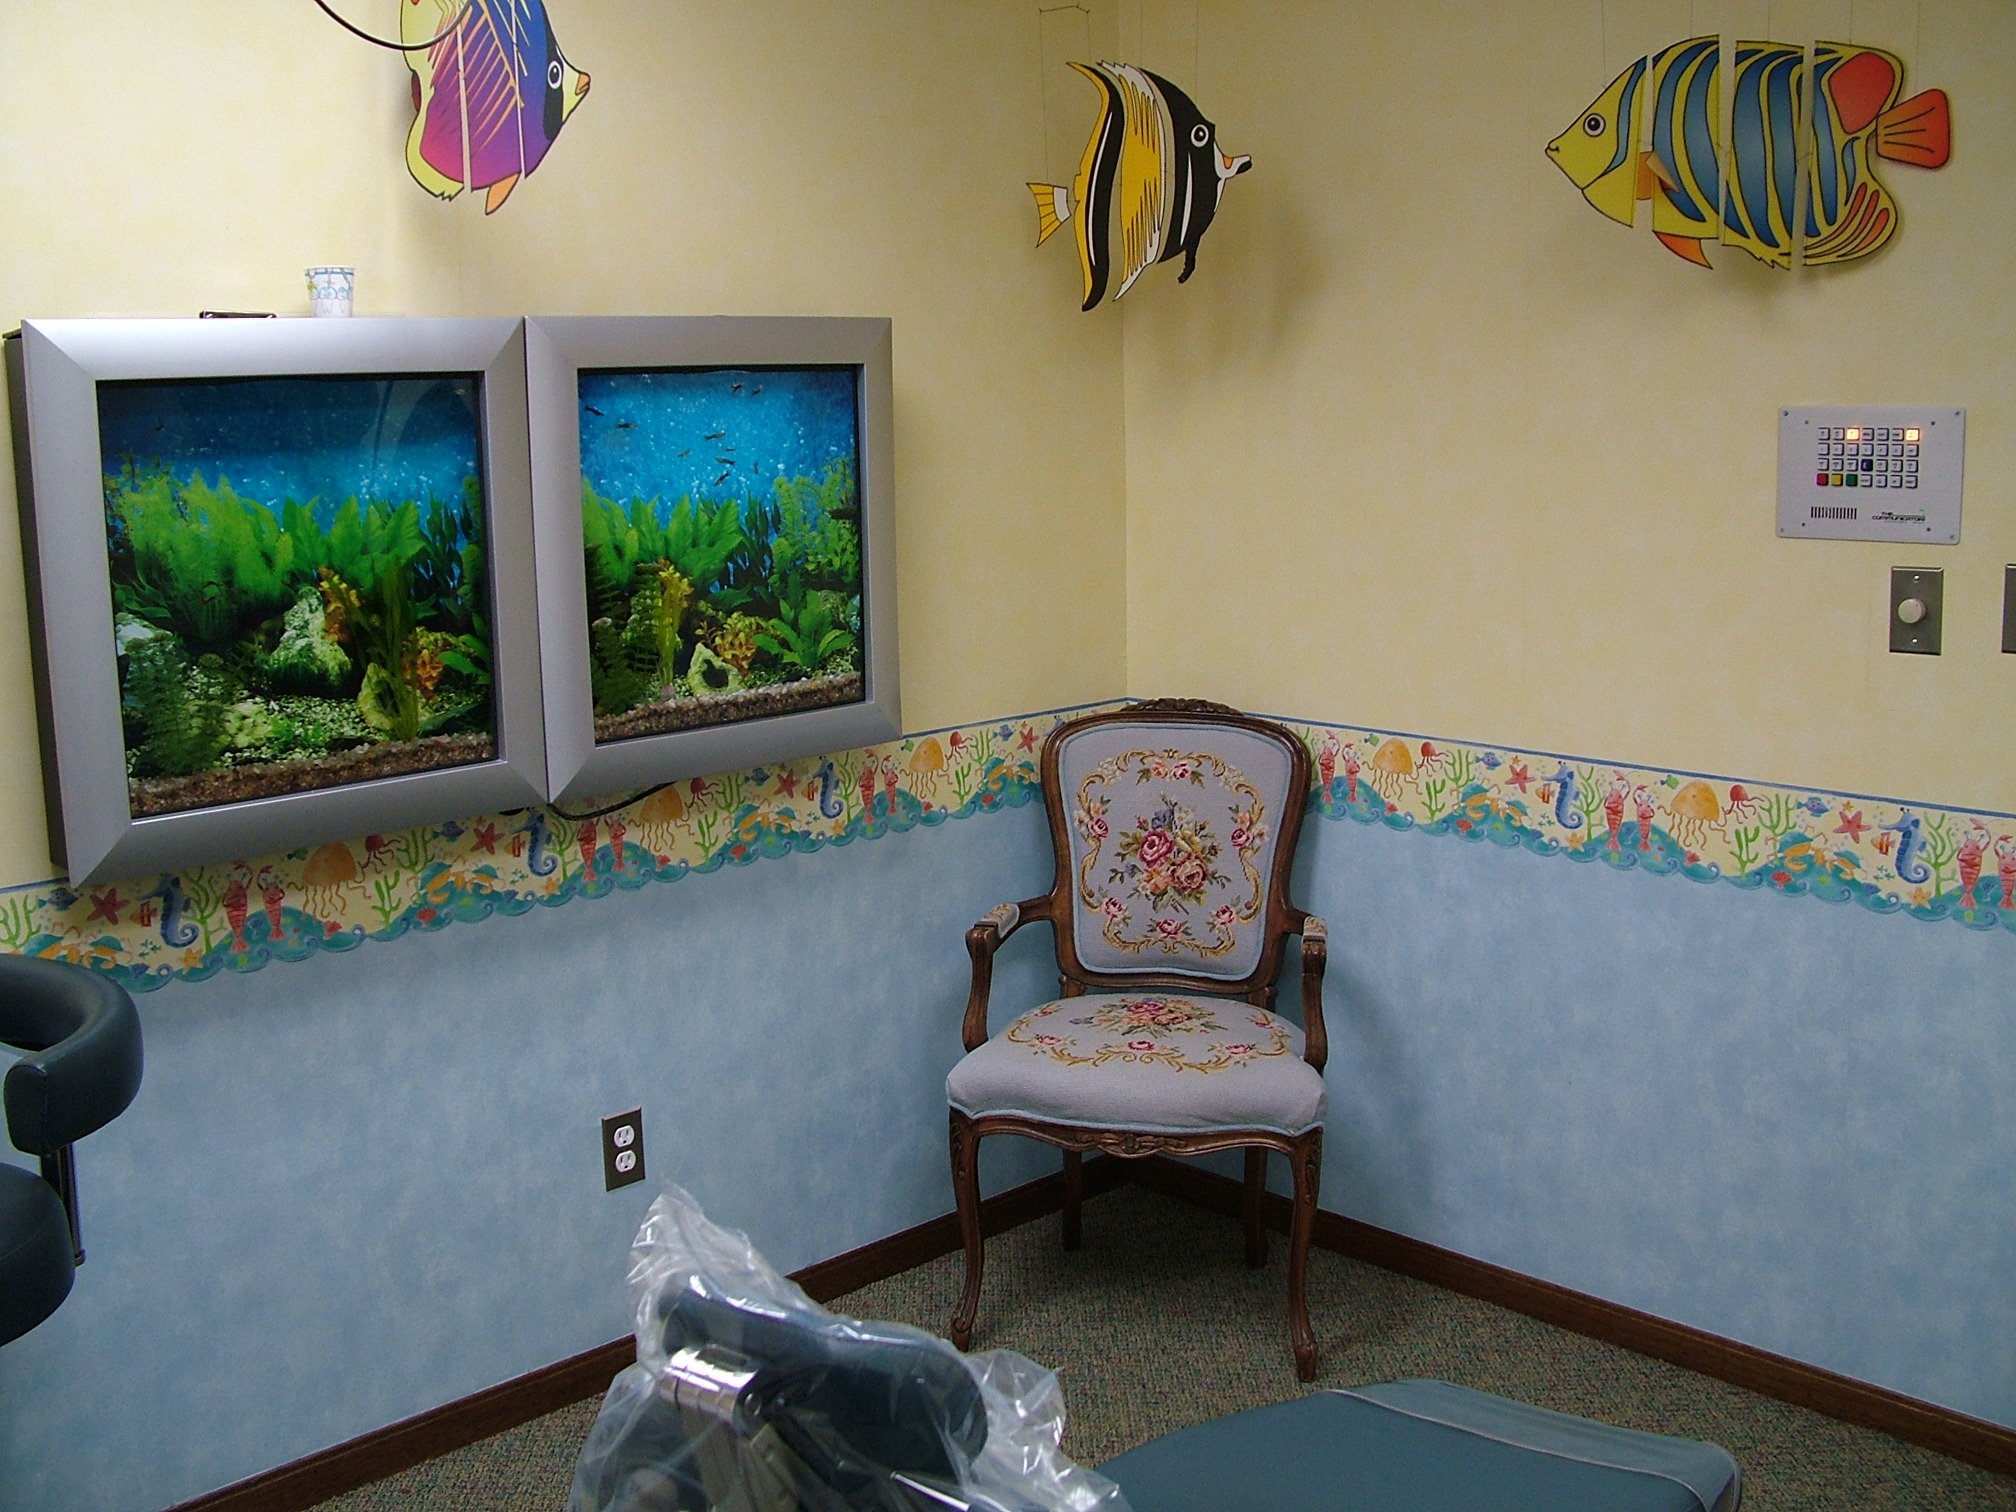 examination room with decorations for children